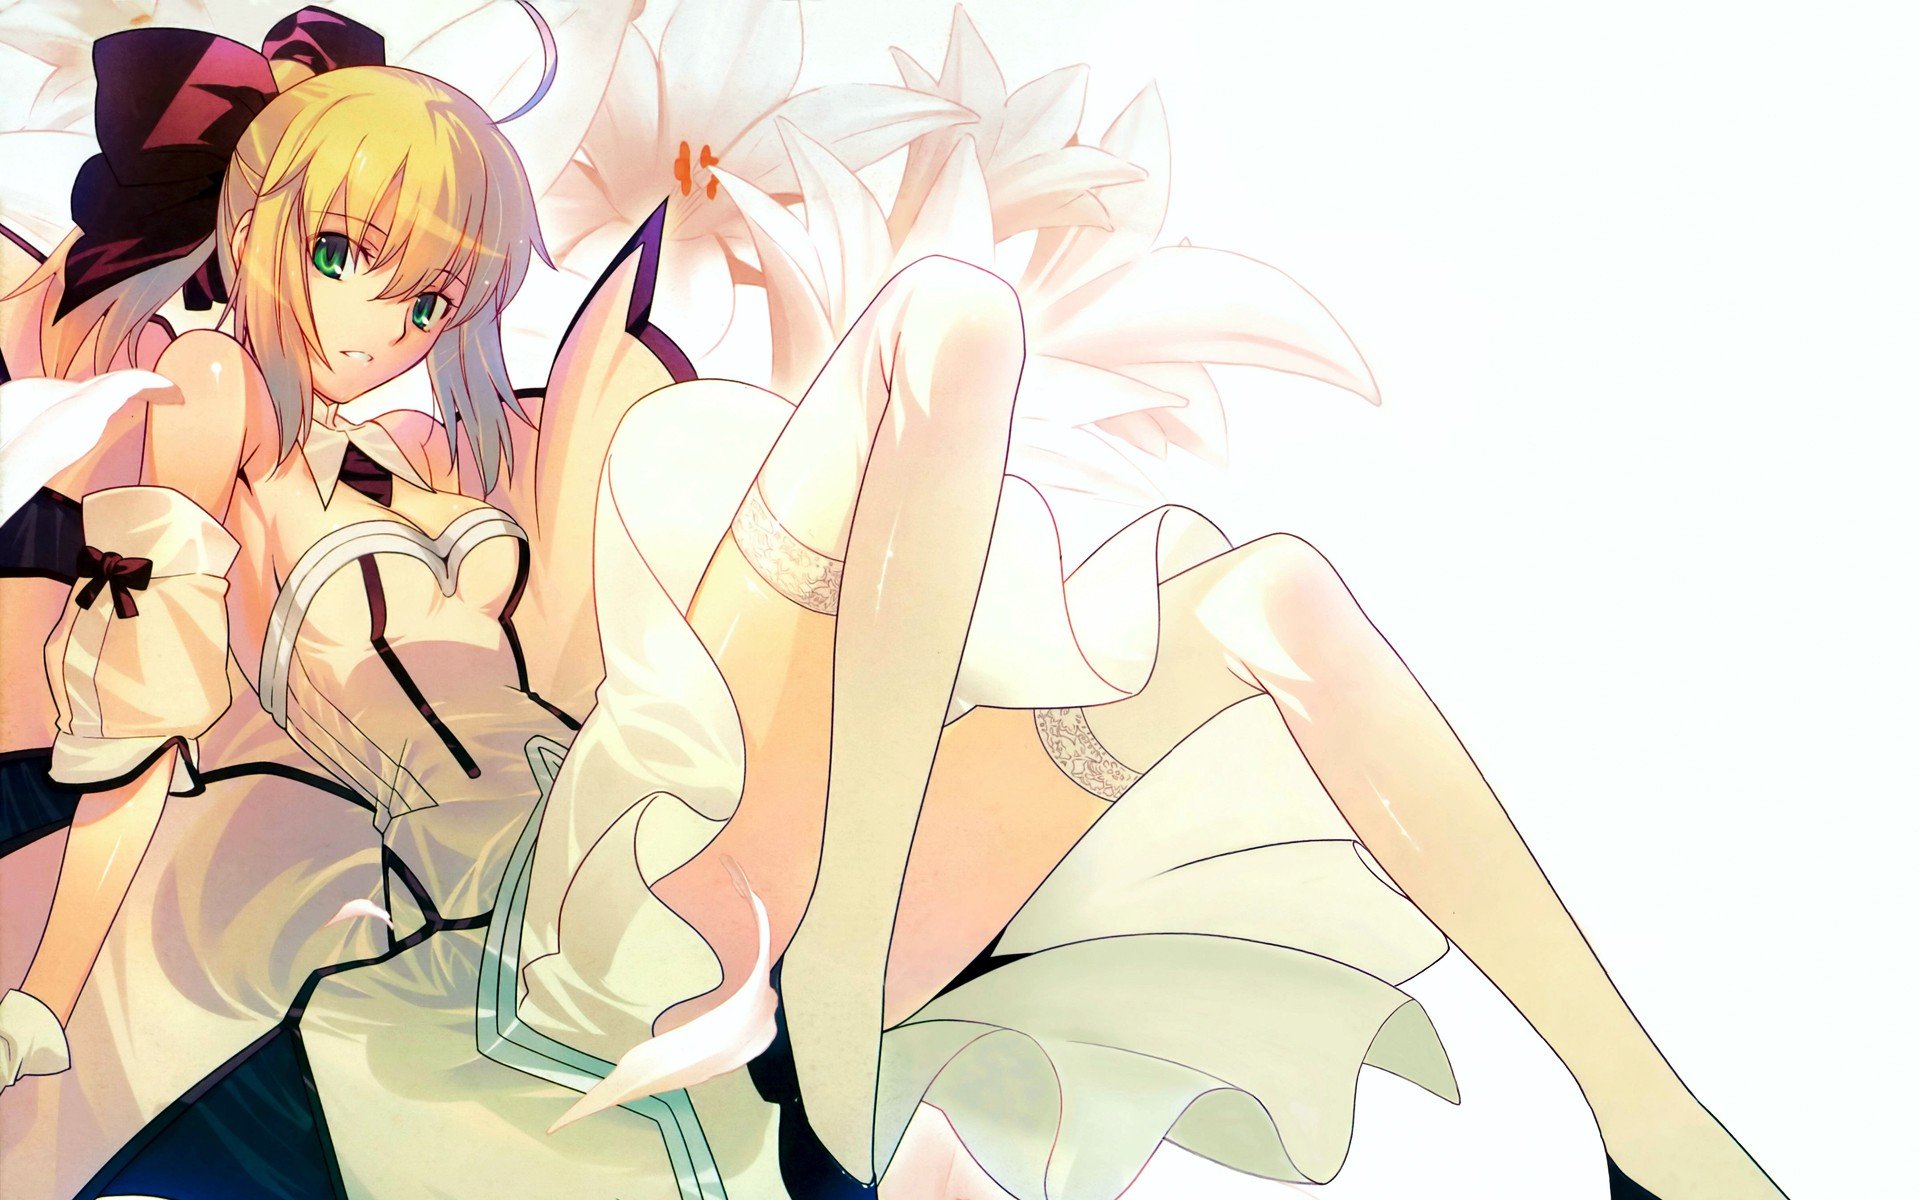 Saber, Anime girls, Fate Series, Fate Stay Night, Type Moon, Saber Lily Wallpaper